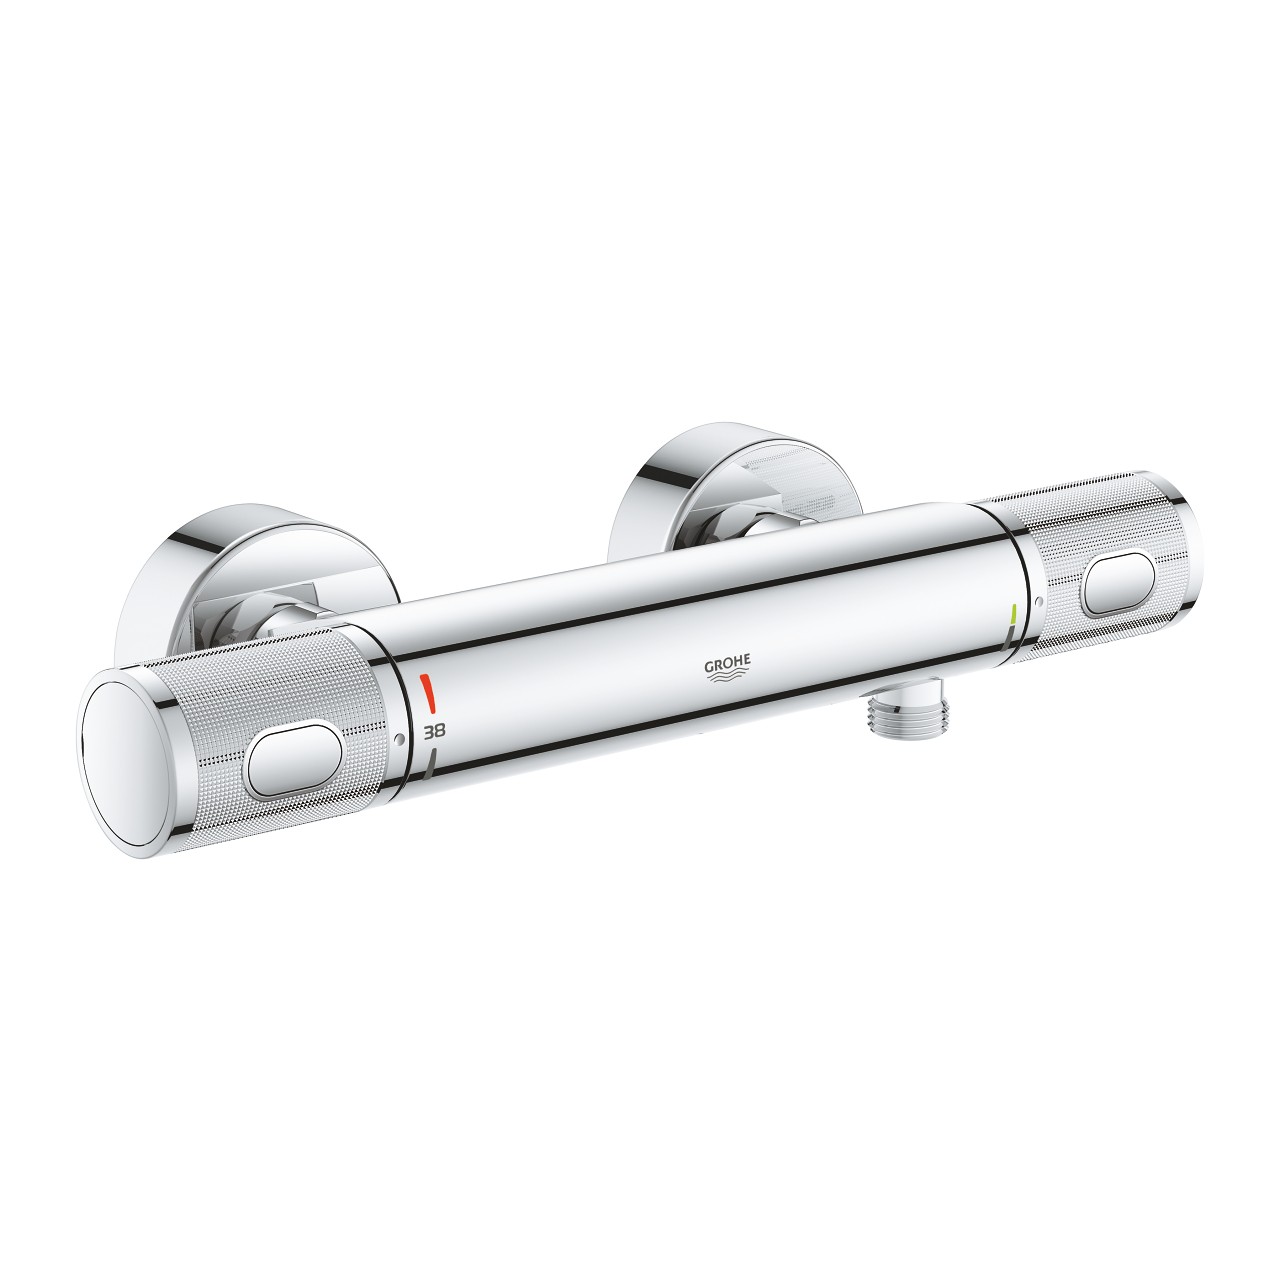 Thermostatmischer Grohe Grohtherm 1000 Performance fuer Dusche, Wandmontage, chrom - 34776000